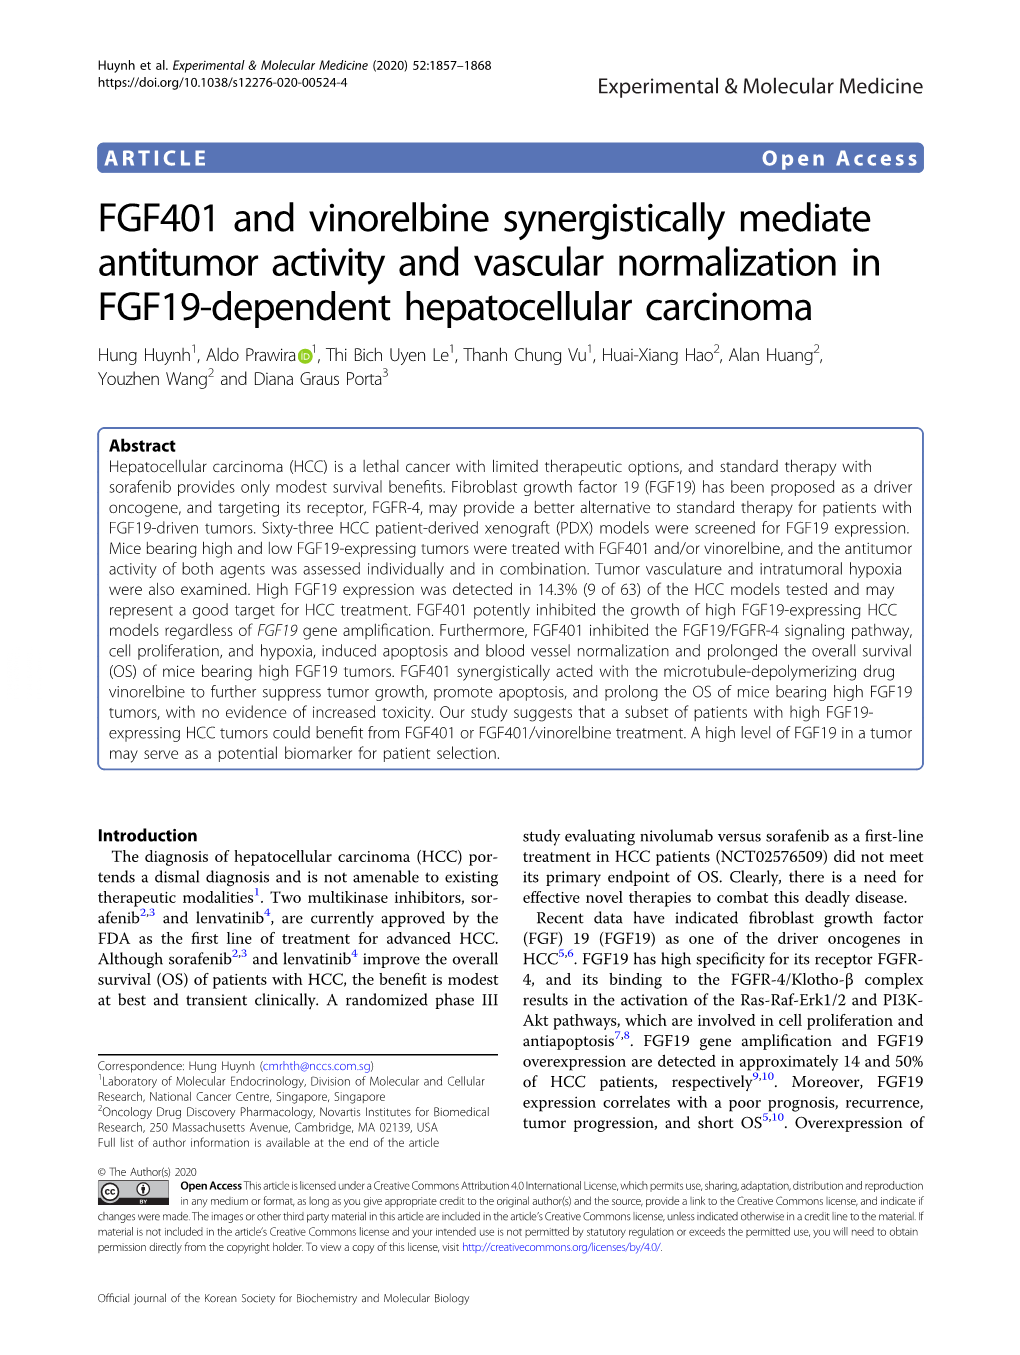 FGF401 and Vinorelbine Synergistically Mediate Antitumor